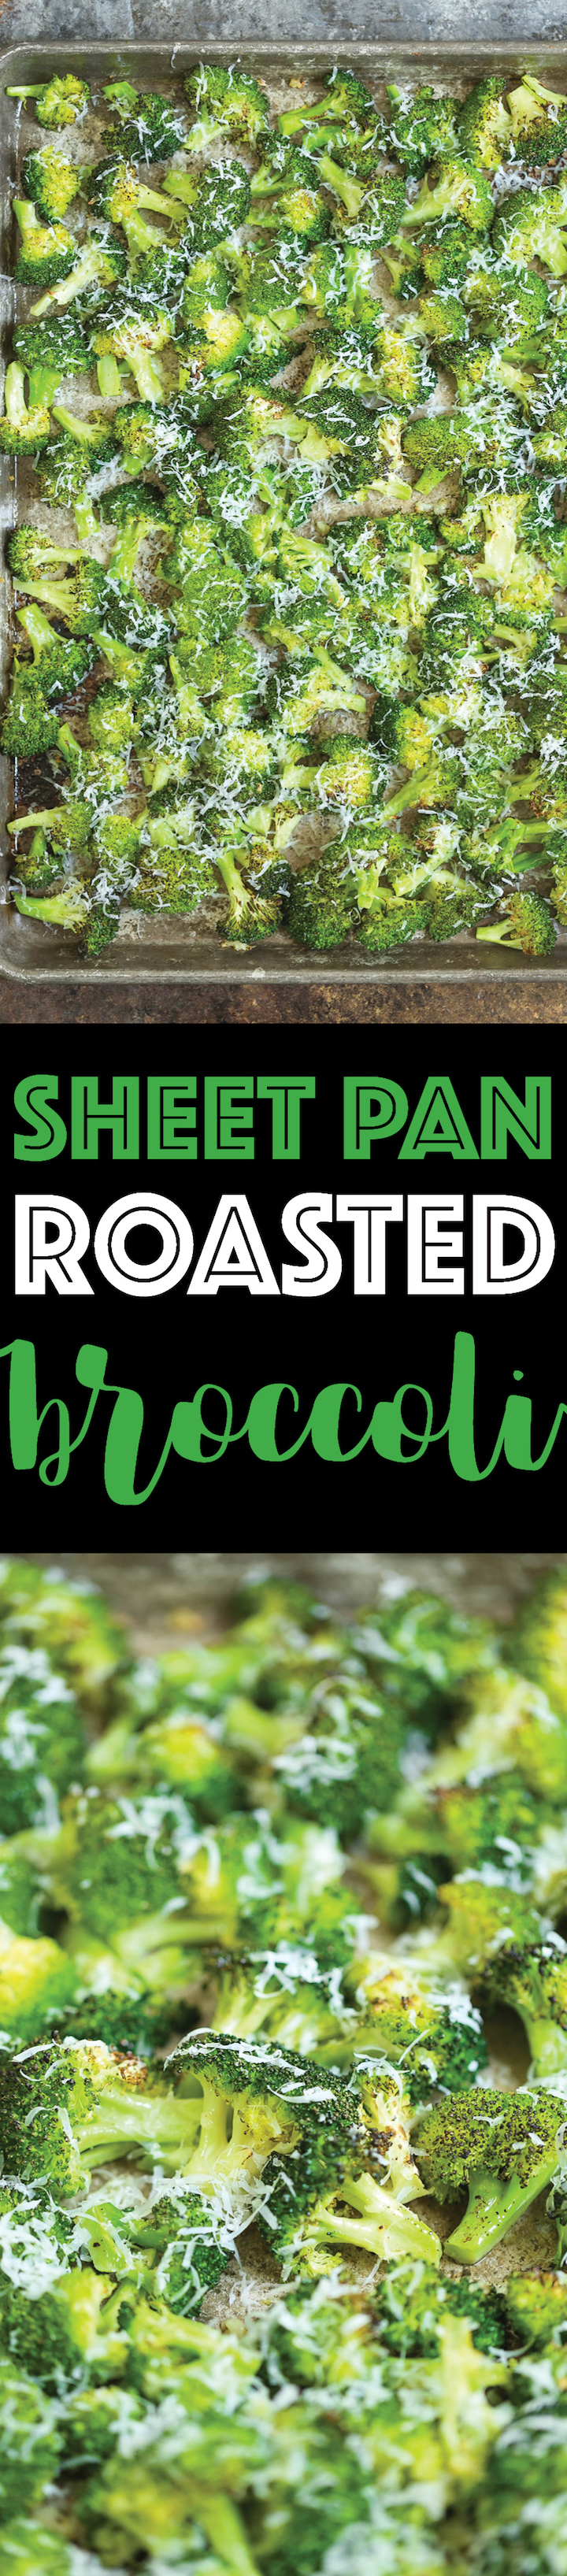 Sheet Pan Roasted Broccoli - How to make roasted broccoli so PERFECTLY and easily using ONE SHEET PAN! The broccoli comes out perfectly crisp and addicting!